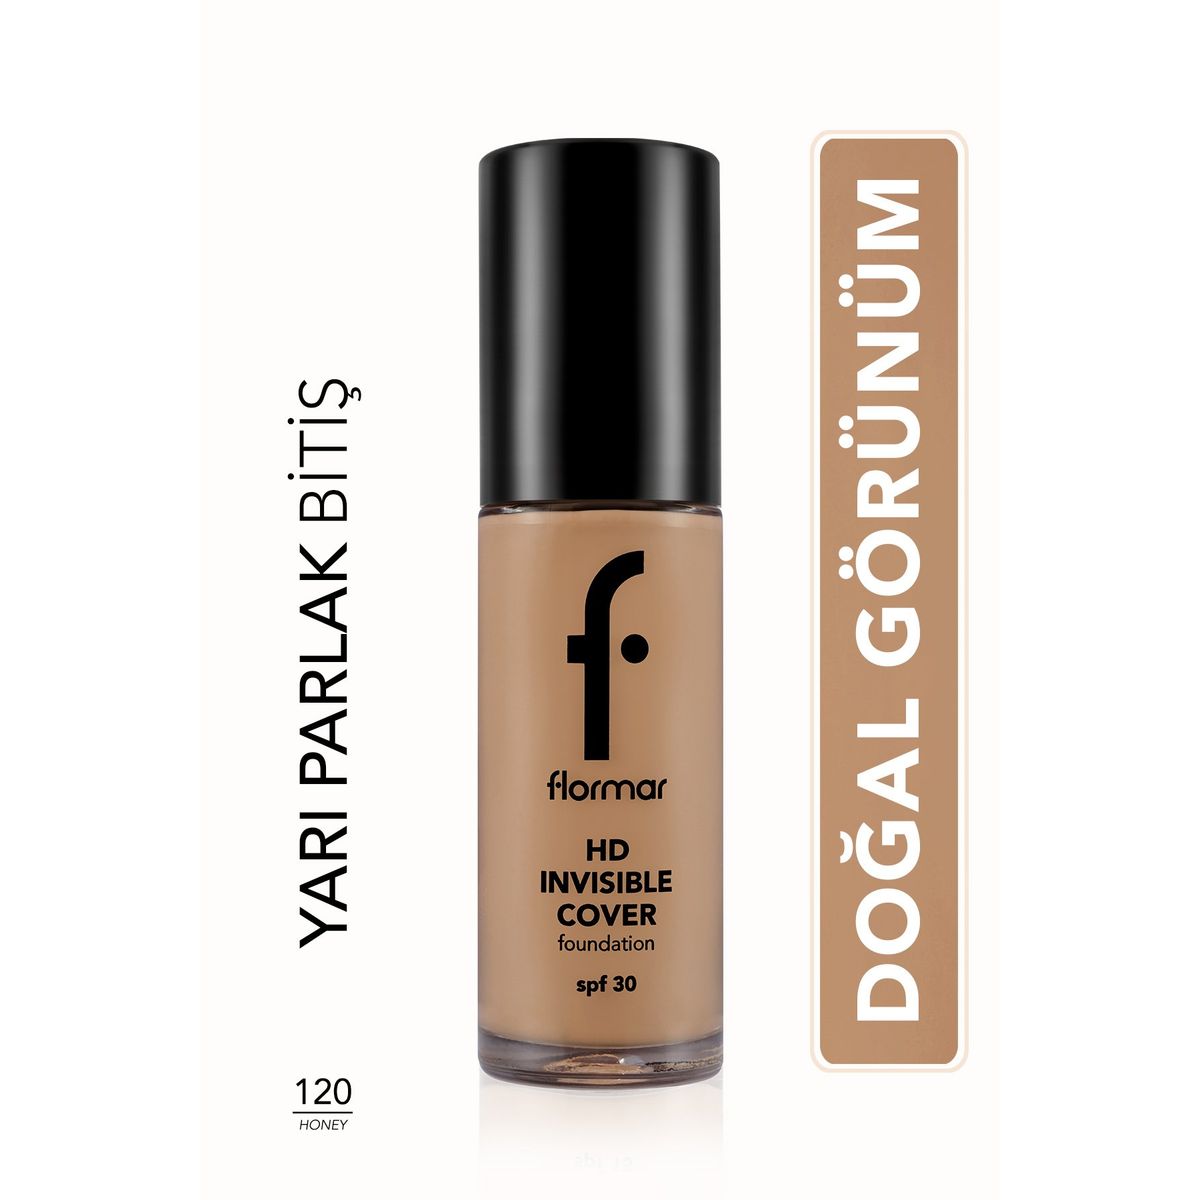 Flormar Invisible Cover HD Foundation SPF30 80 Soft Beige 30ml (1.01fl oz)